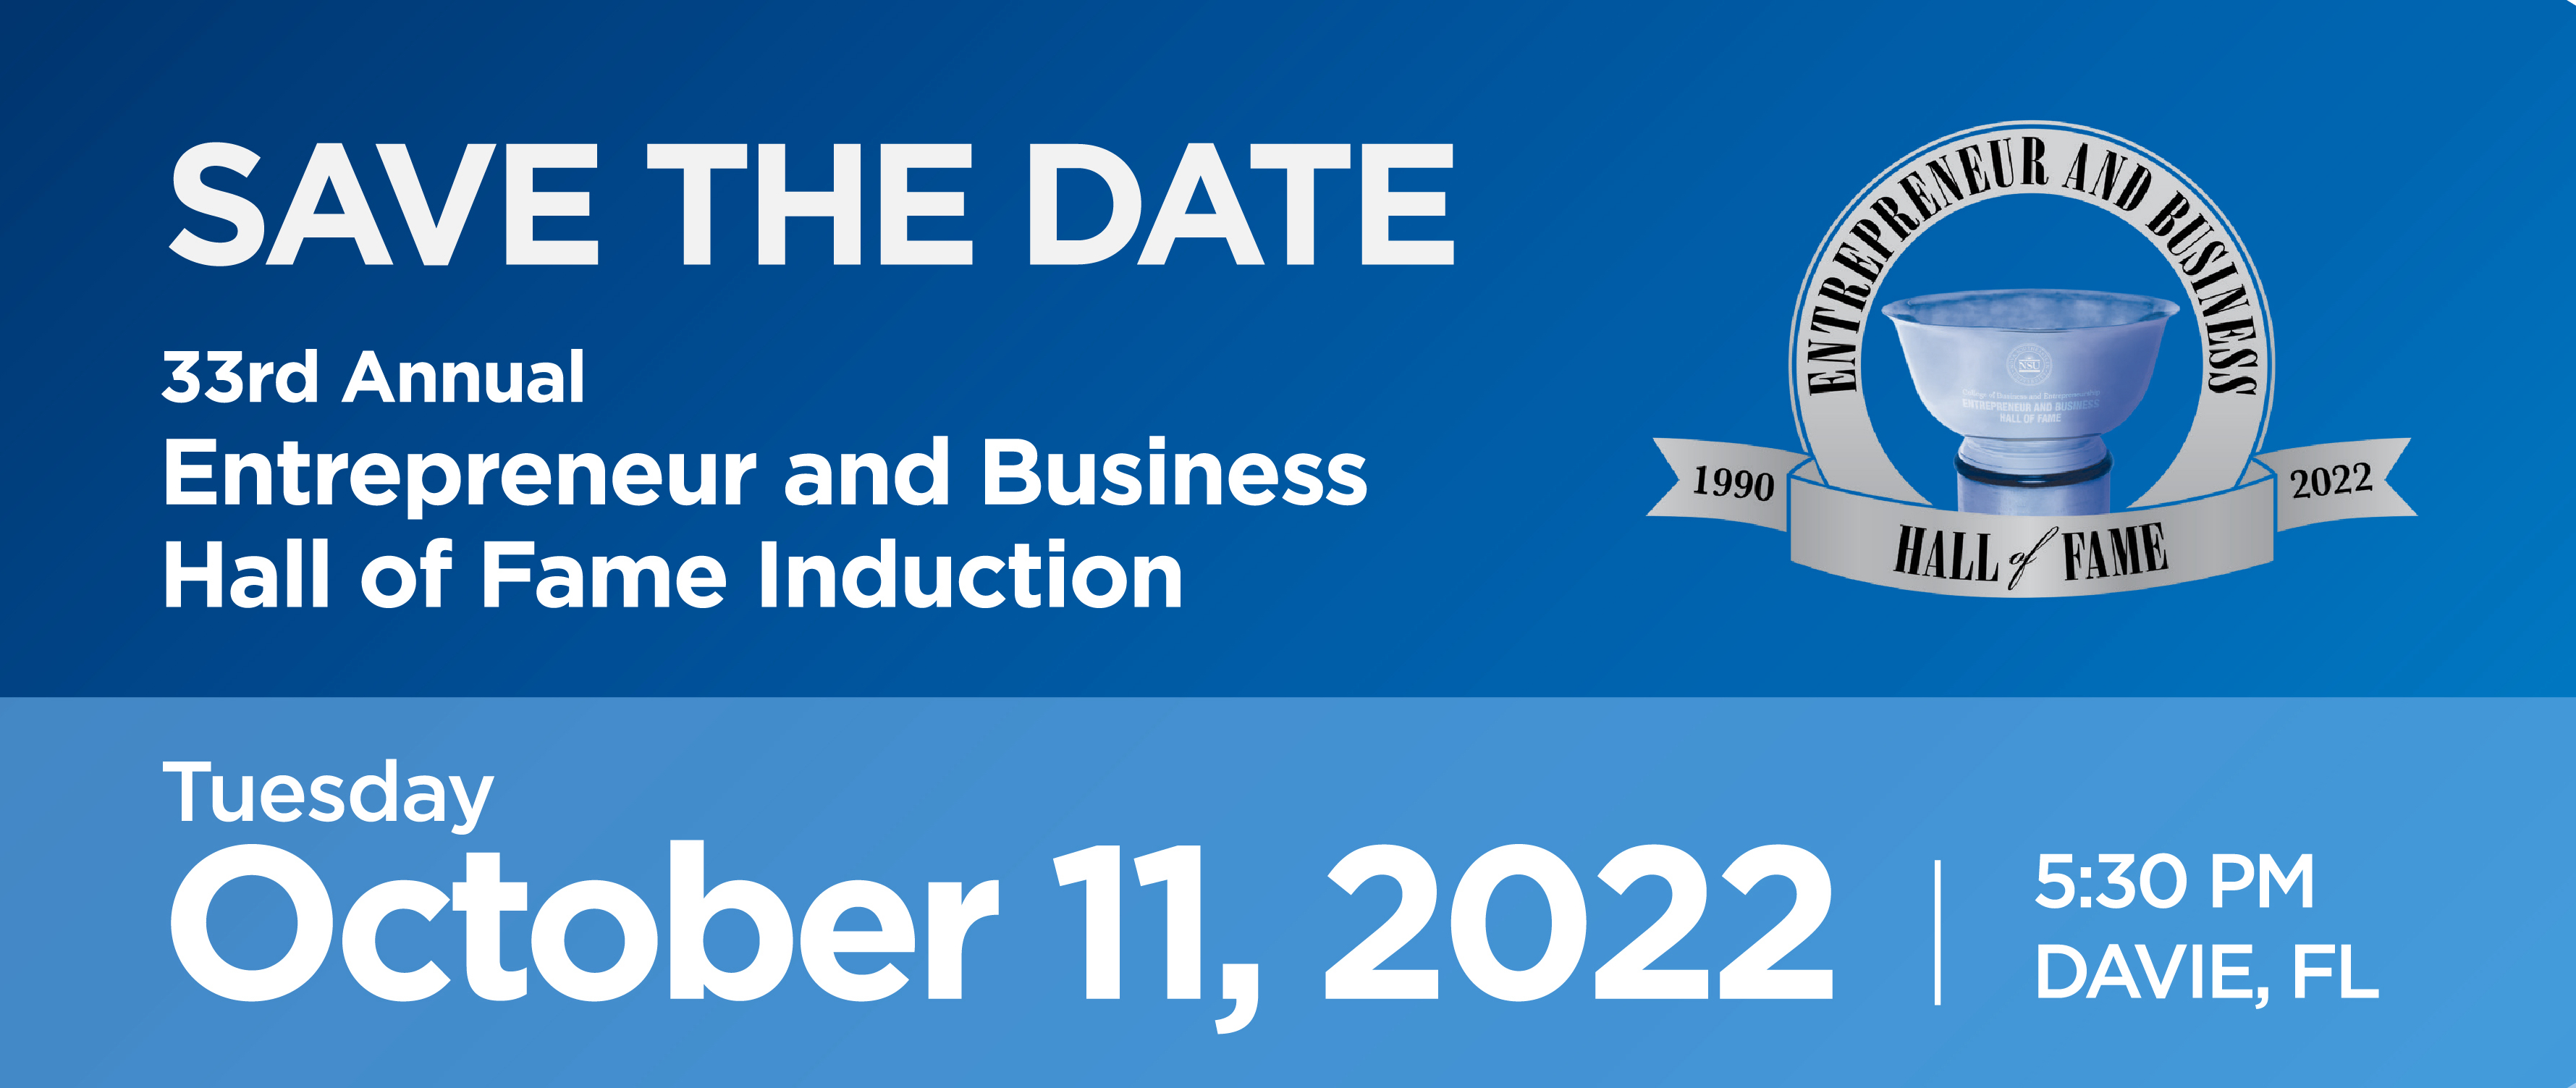 Save the Date Hall of Fame 2022 October 5th!